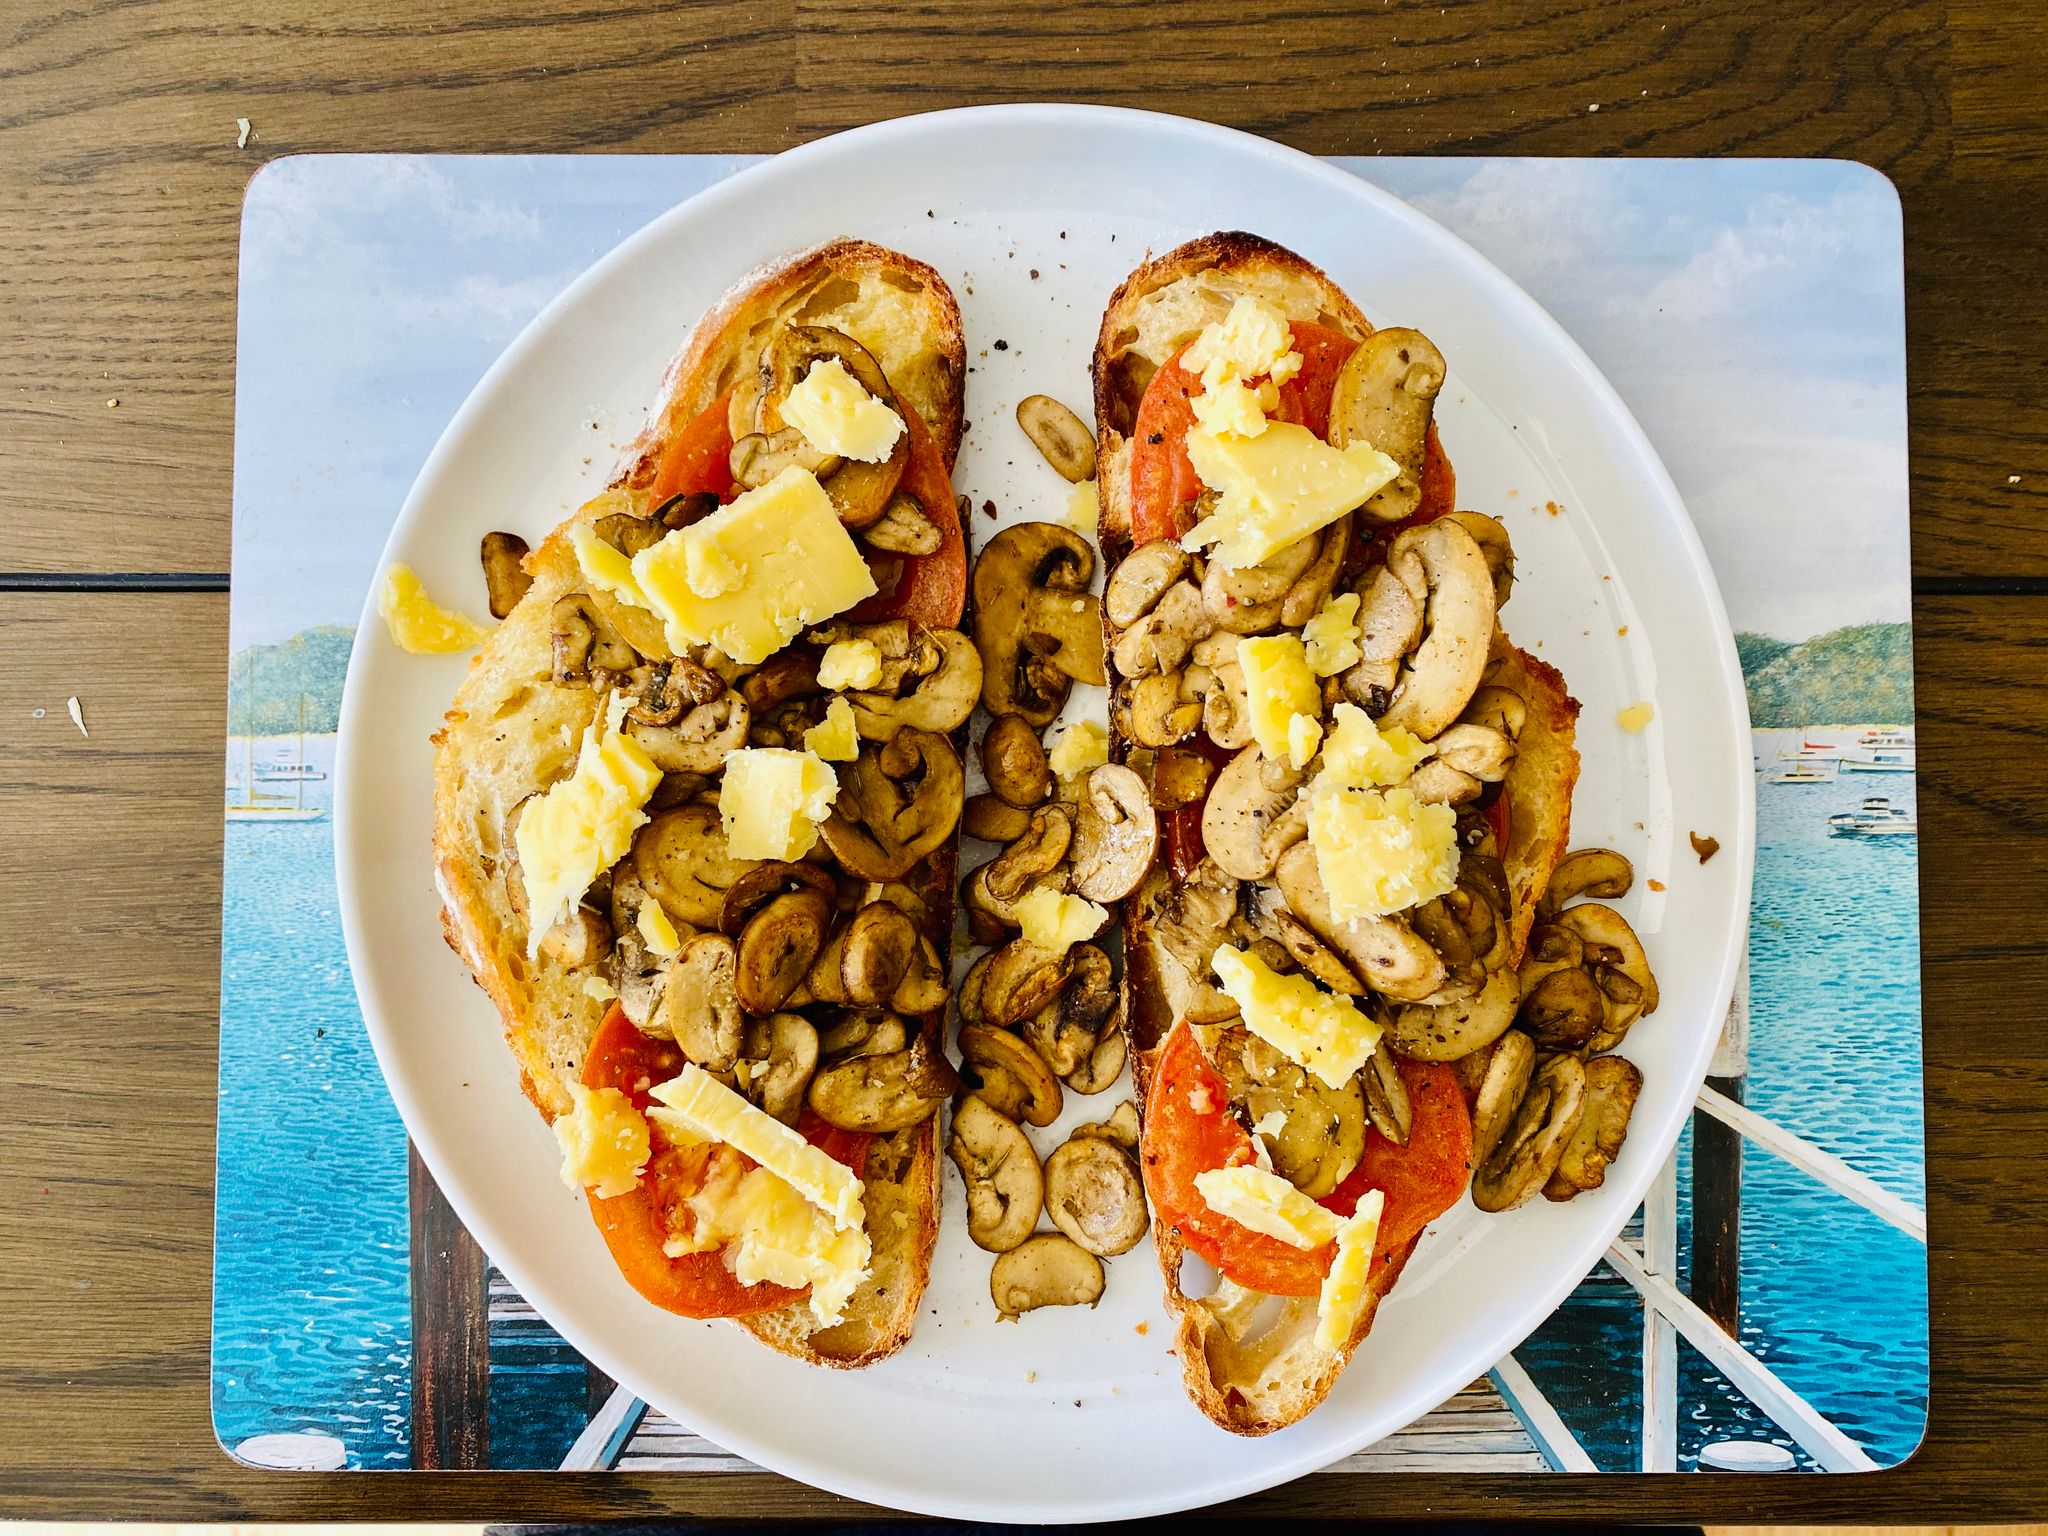 A photo of a plate with two pieces of home-made bread with grilled tomato and cooked mushrooms on top, sprinkled with chunks of fancy cheddar cheese.